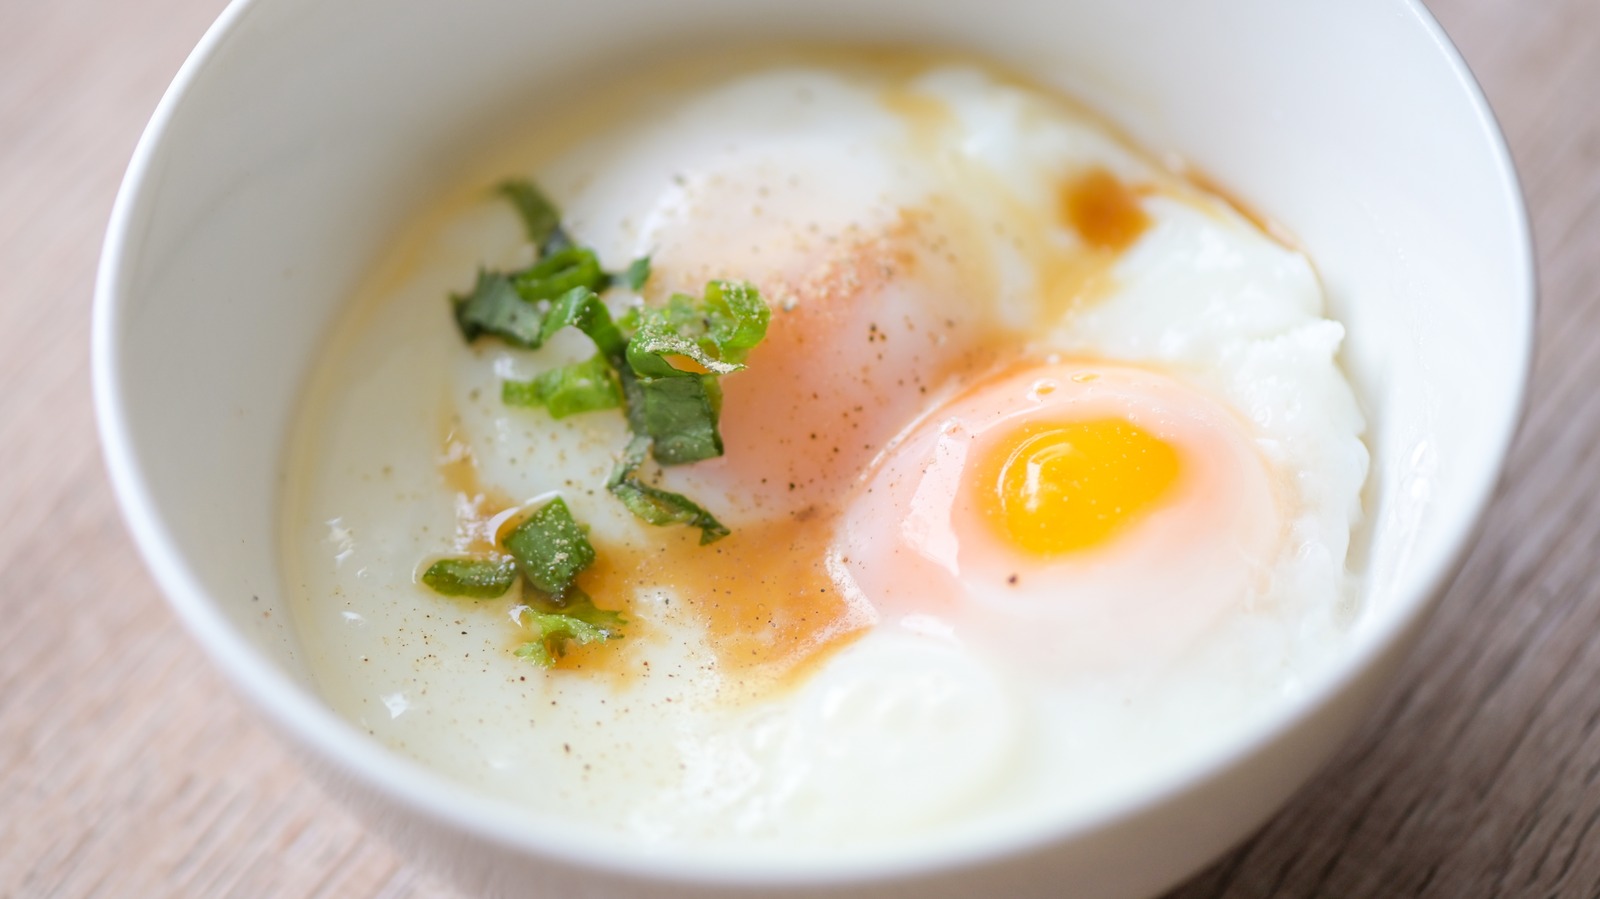 https://www.thedailymeal.com/img/gallery/13-expert-tips-for-cooking-eggs-in-the-microwave/l-intro-1700396147.jpg